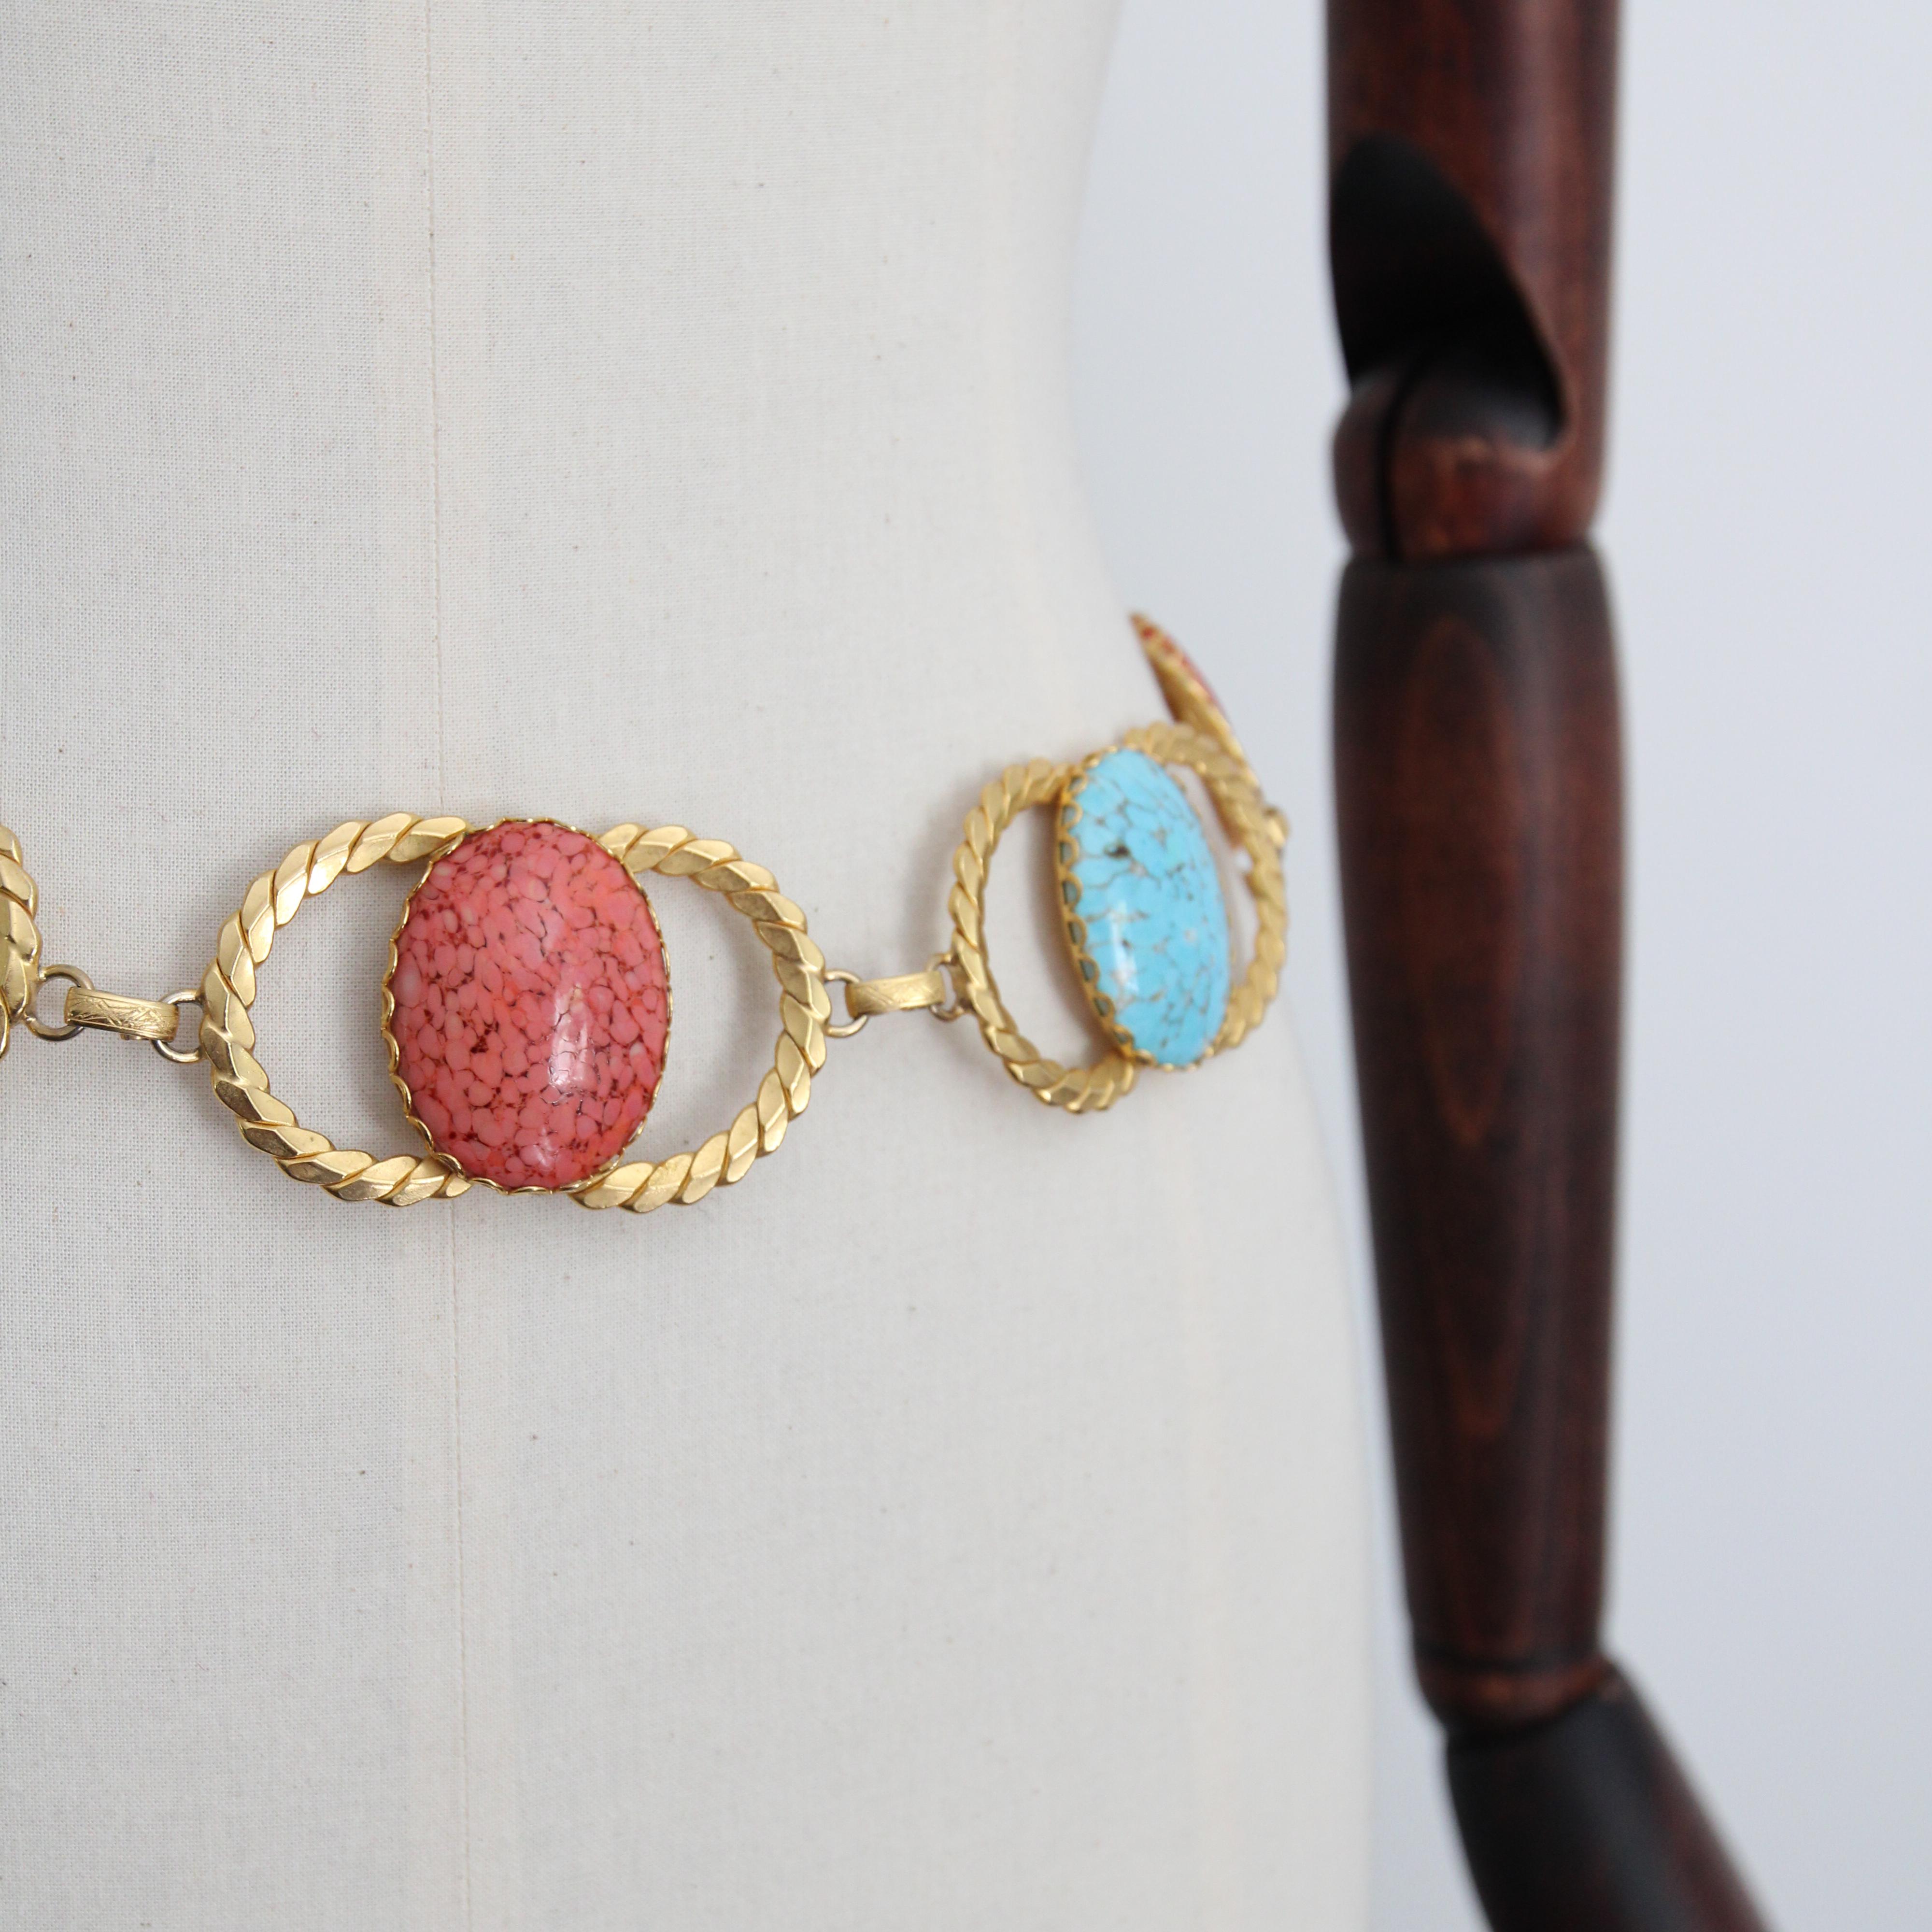 Vintage 1970's coral and turquoise glass cabochons waist chain belt UK 8 US 4 For Sale 3